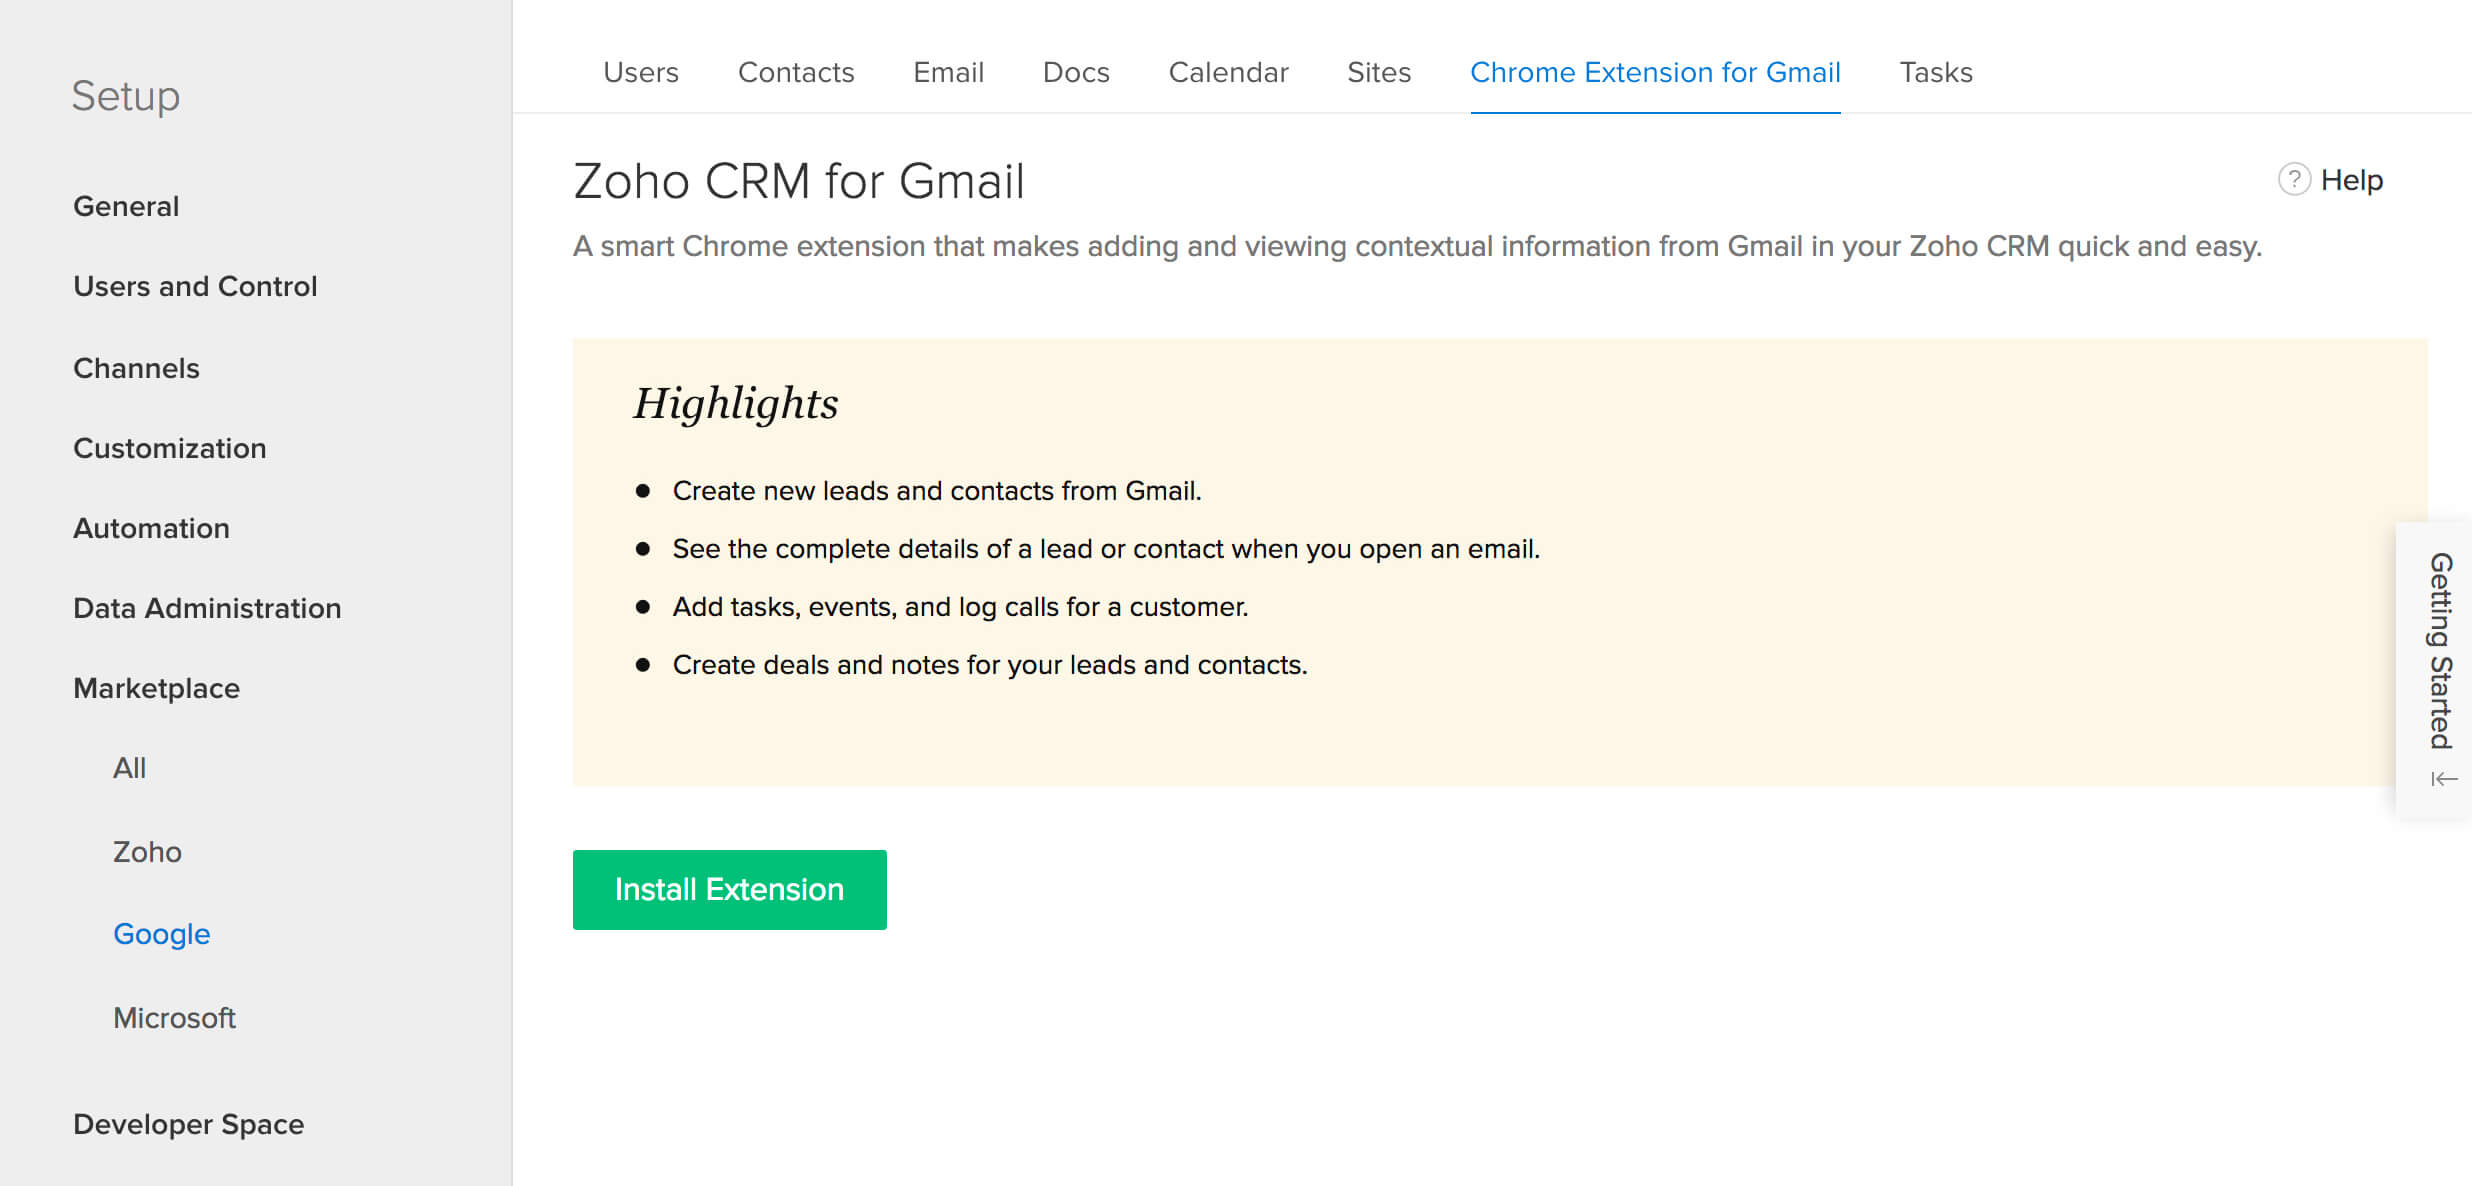 Visit Zoho CRM to install Chrome's Zoho CRM for Gmail